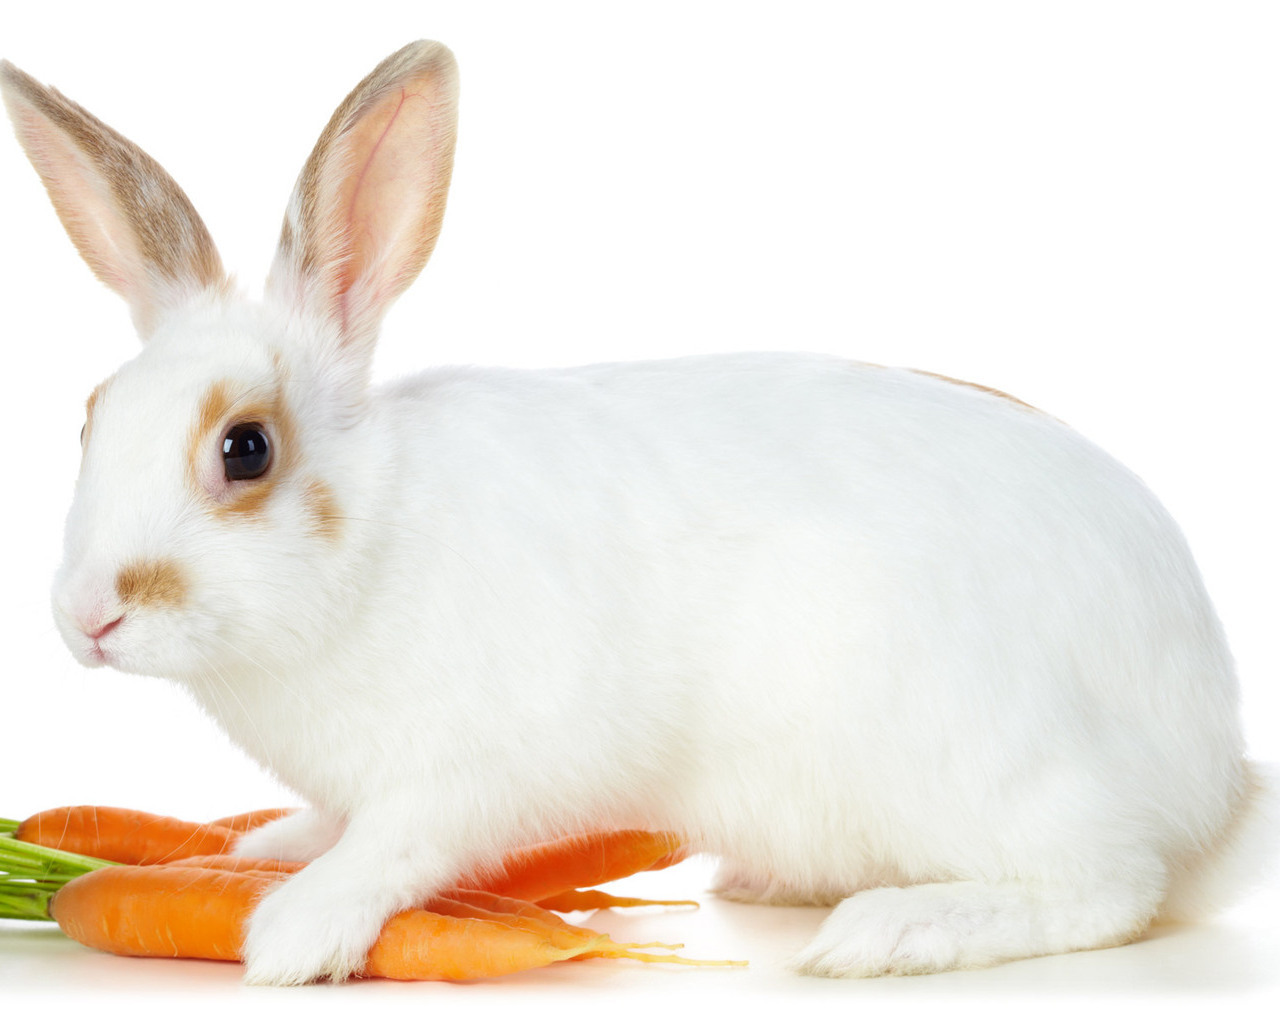 All About Animal Wildlife Cute White Rabbit HD Wallpapers 2012